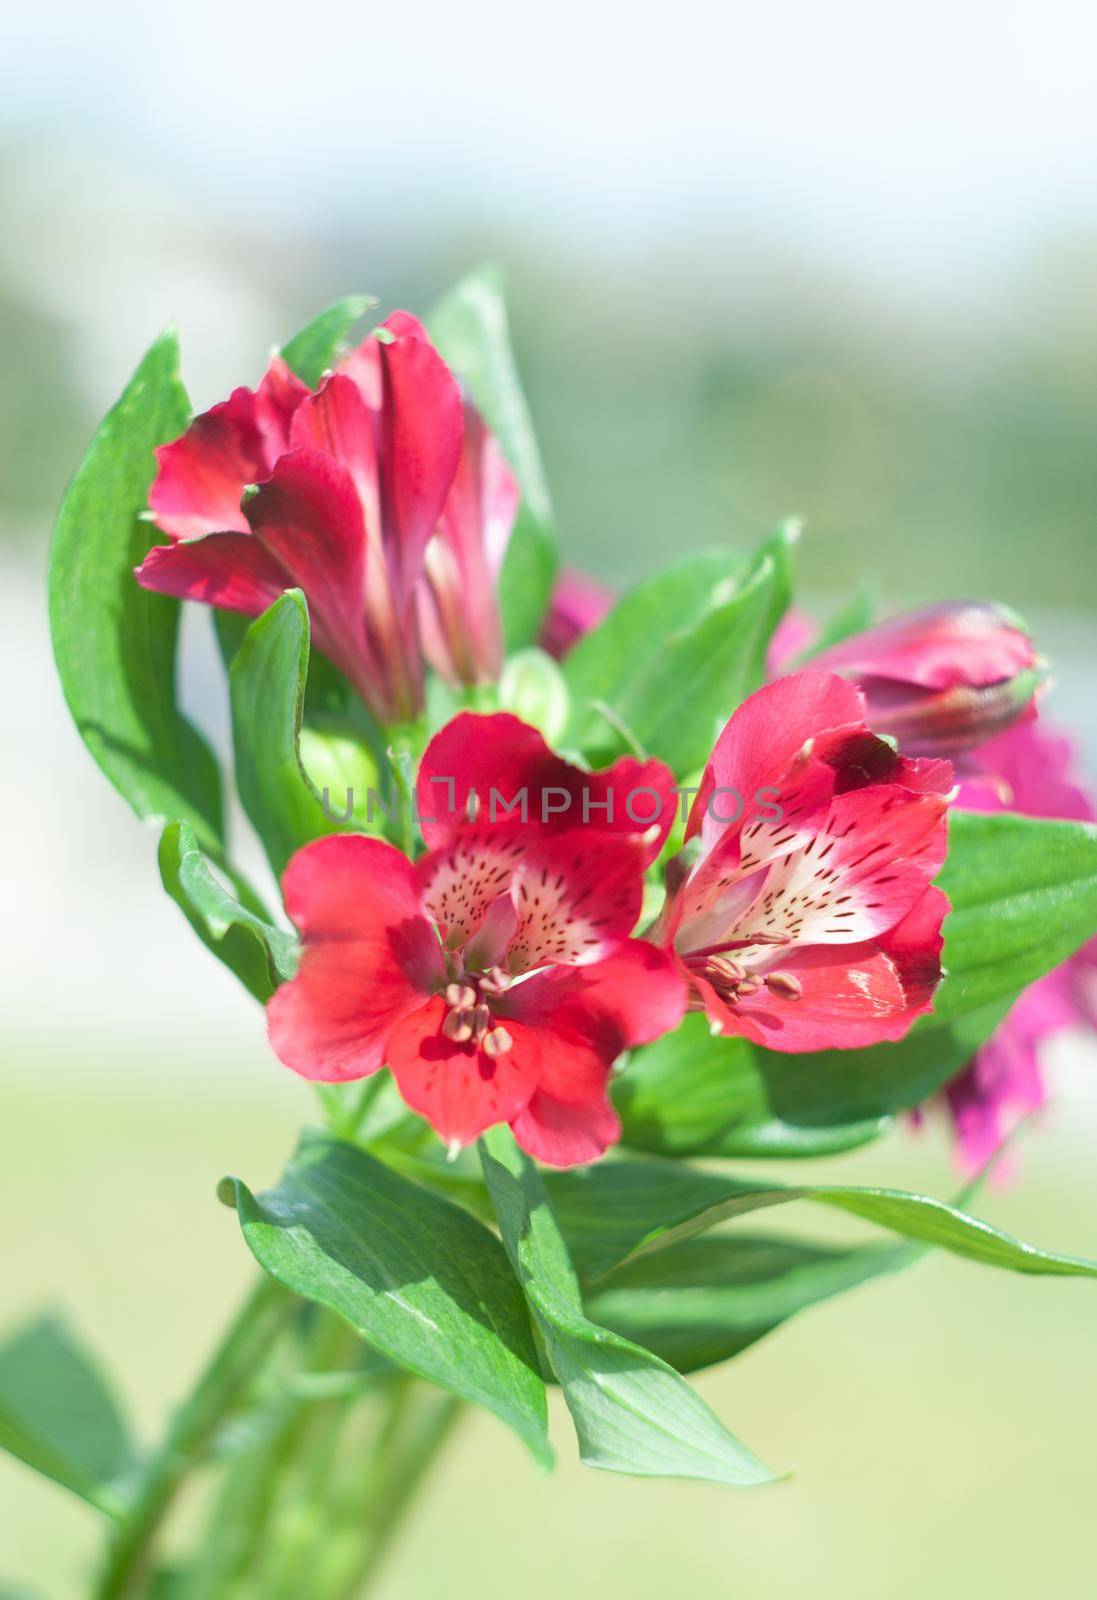 bouquet of red alstroemeria, close-up, floral background, mother's day, spring by KaterinaDalemans